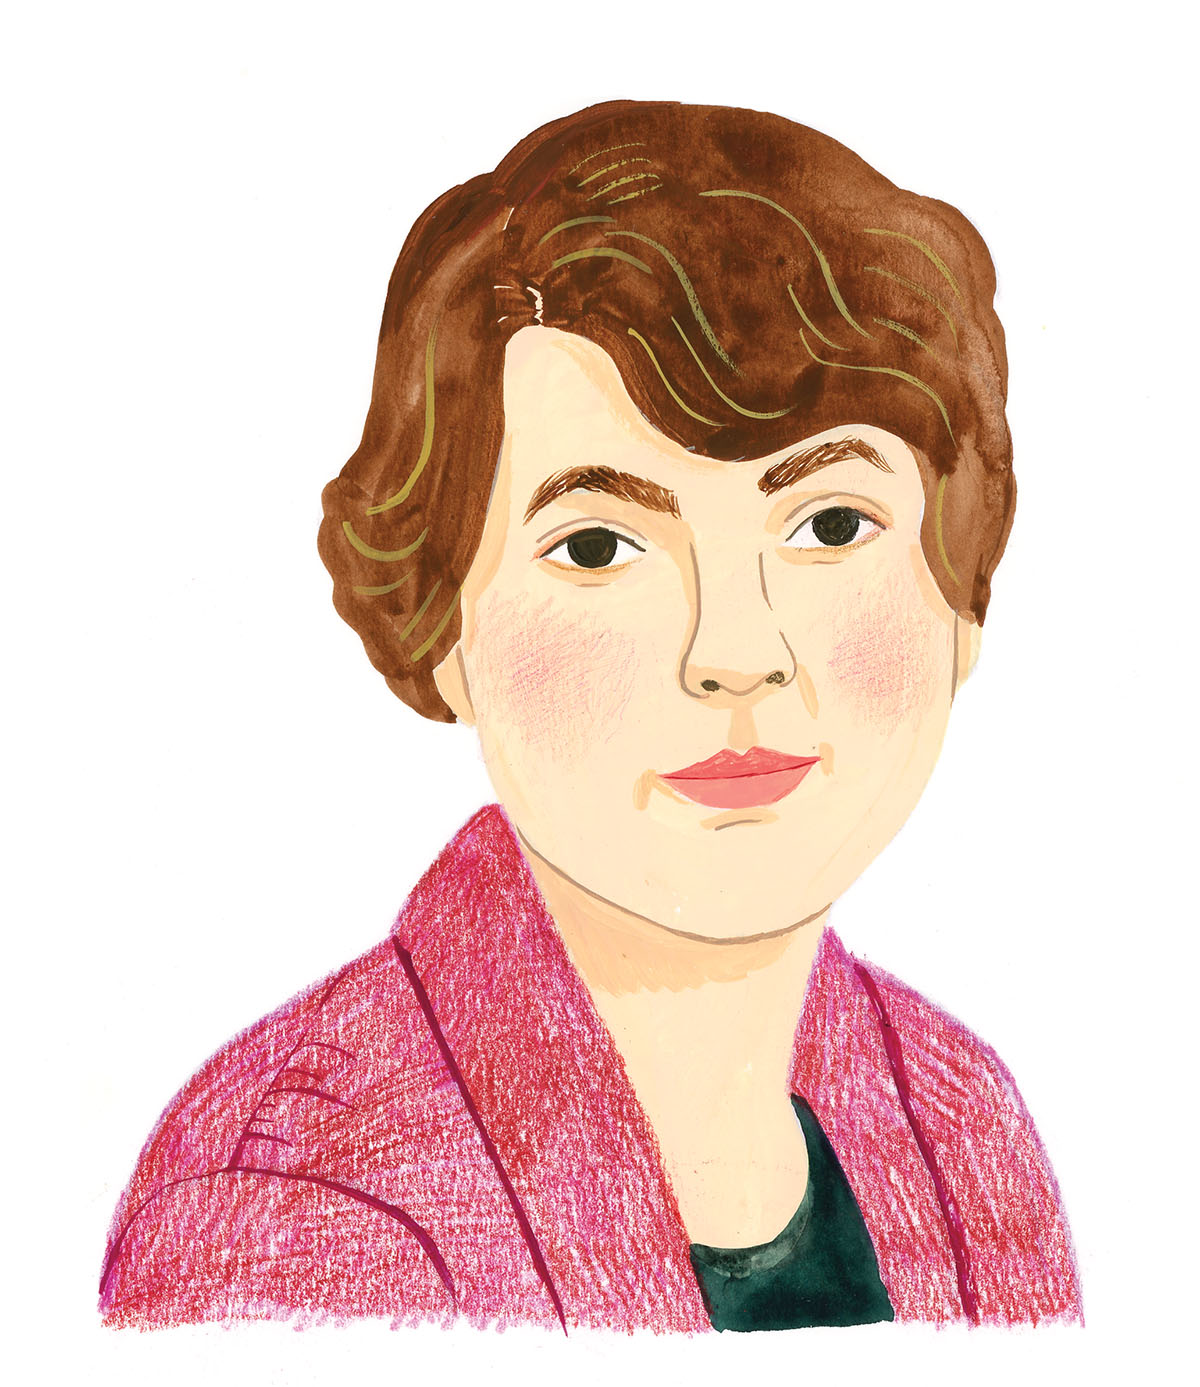 An illustration of Minnie Fisher Cunningham